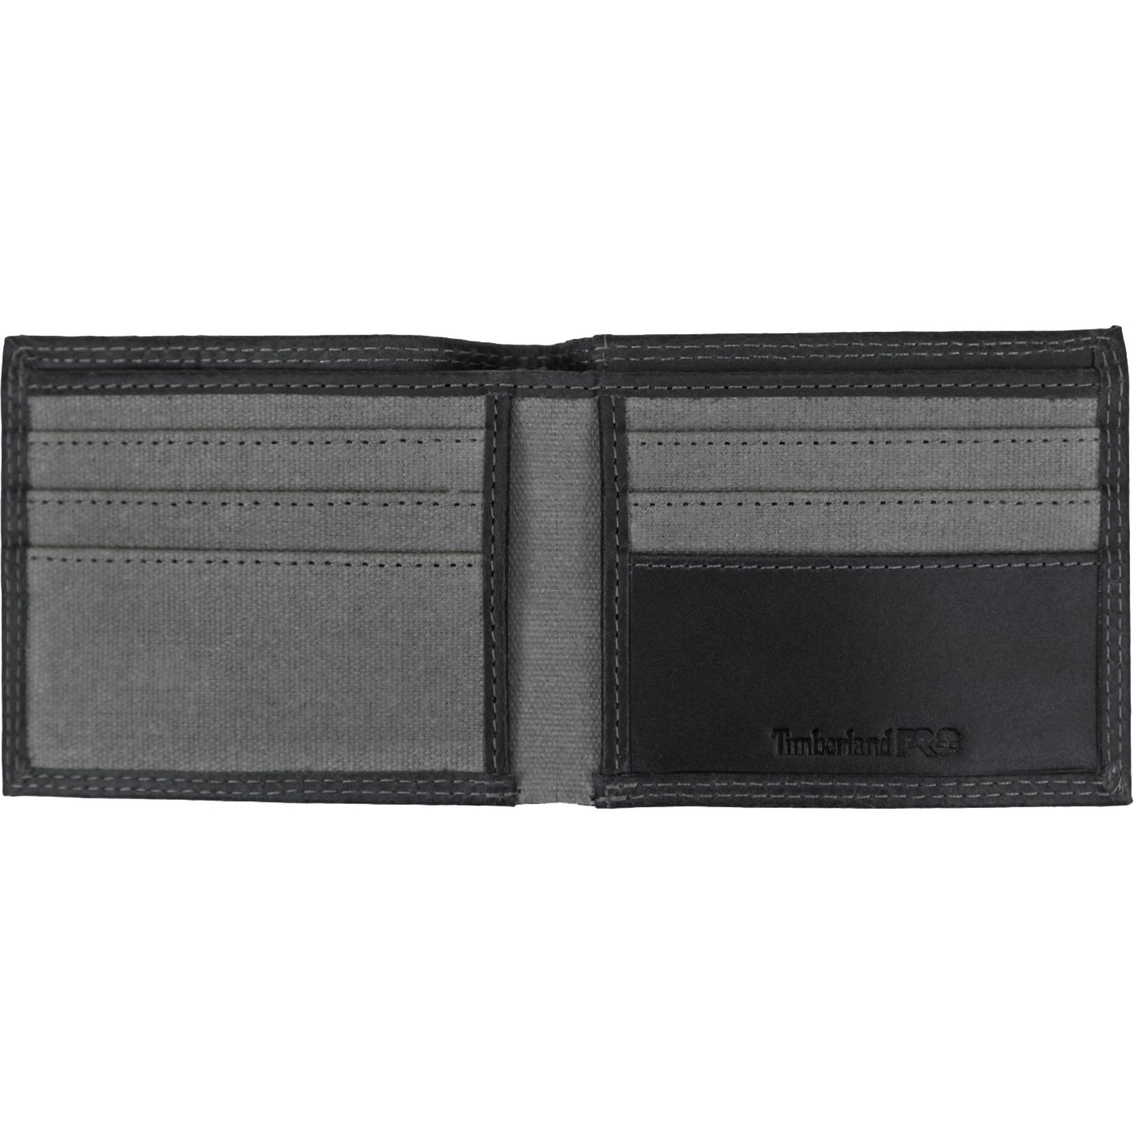 Timberland Pro Canvas Trifold Wallet | Wallets | Clothing & Accessories ...